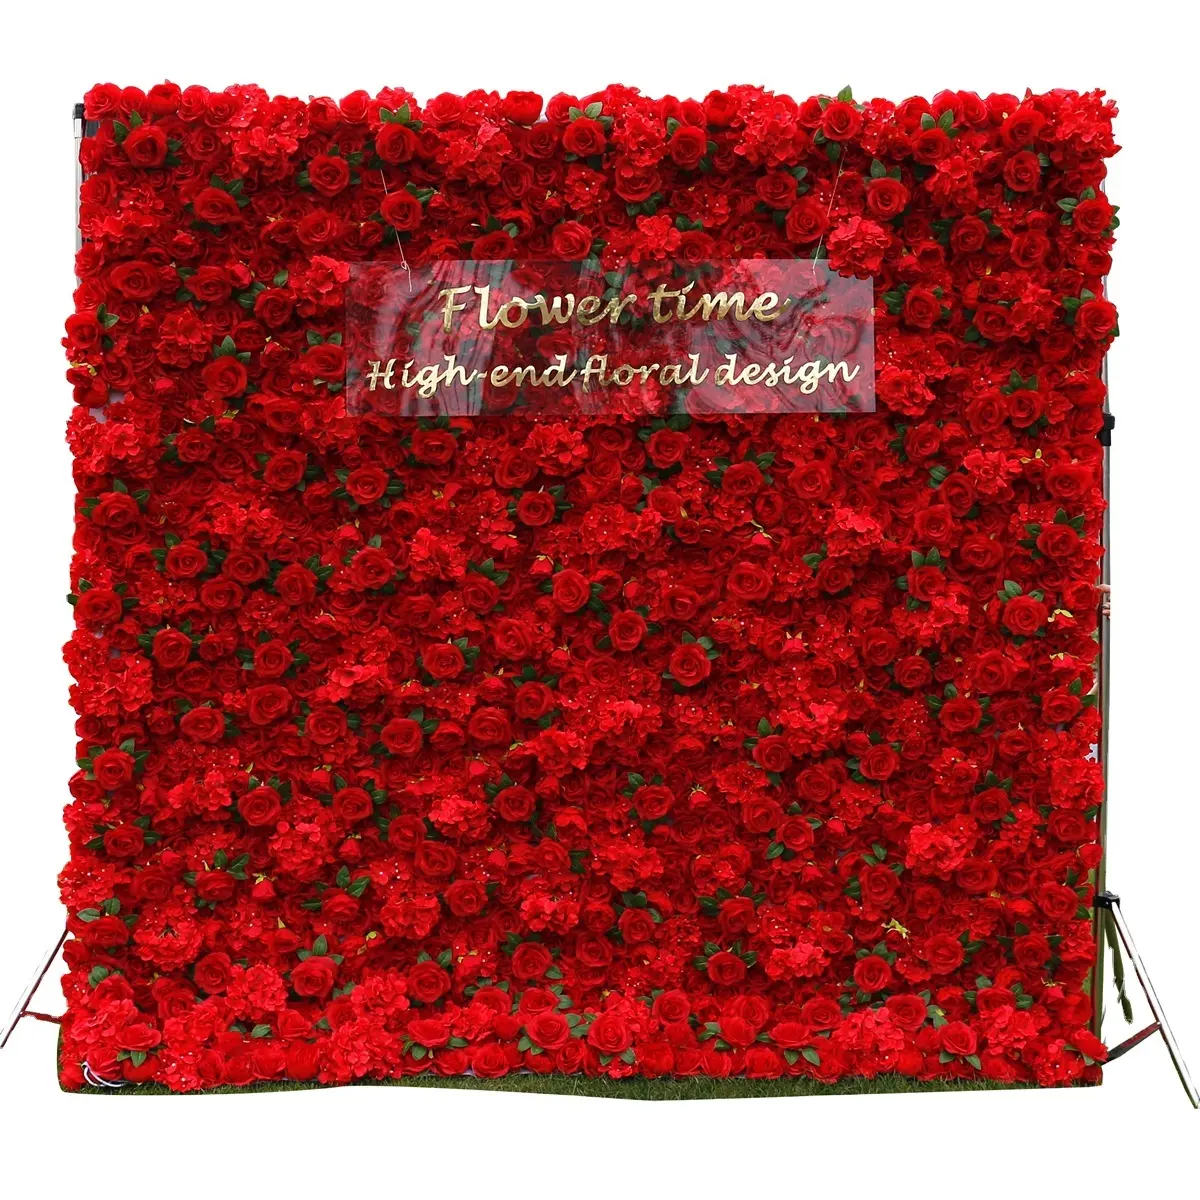 SH Customize 3D New Design Hanging Roll Up Curtain Wedding Silk RED ROSE Floral Wall Backdrop 8x8 Flower Wall Panel